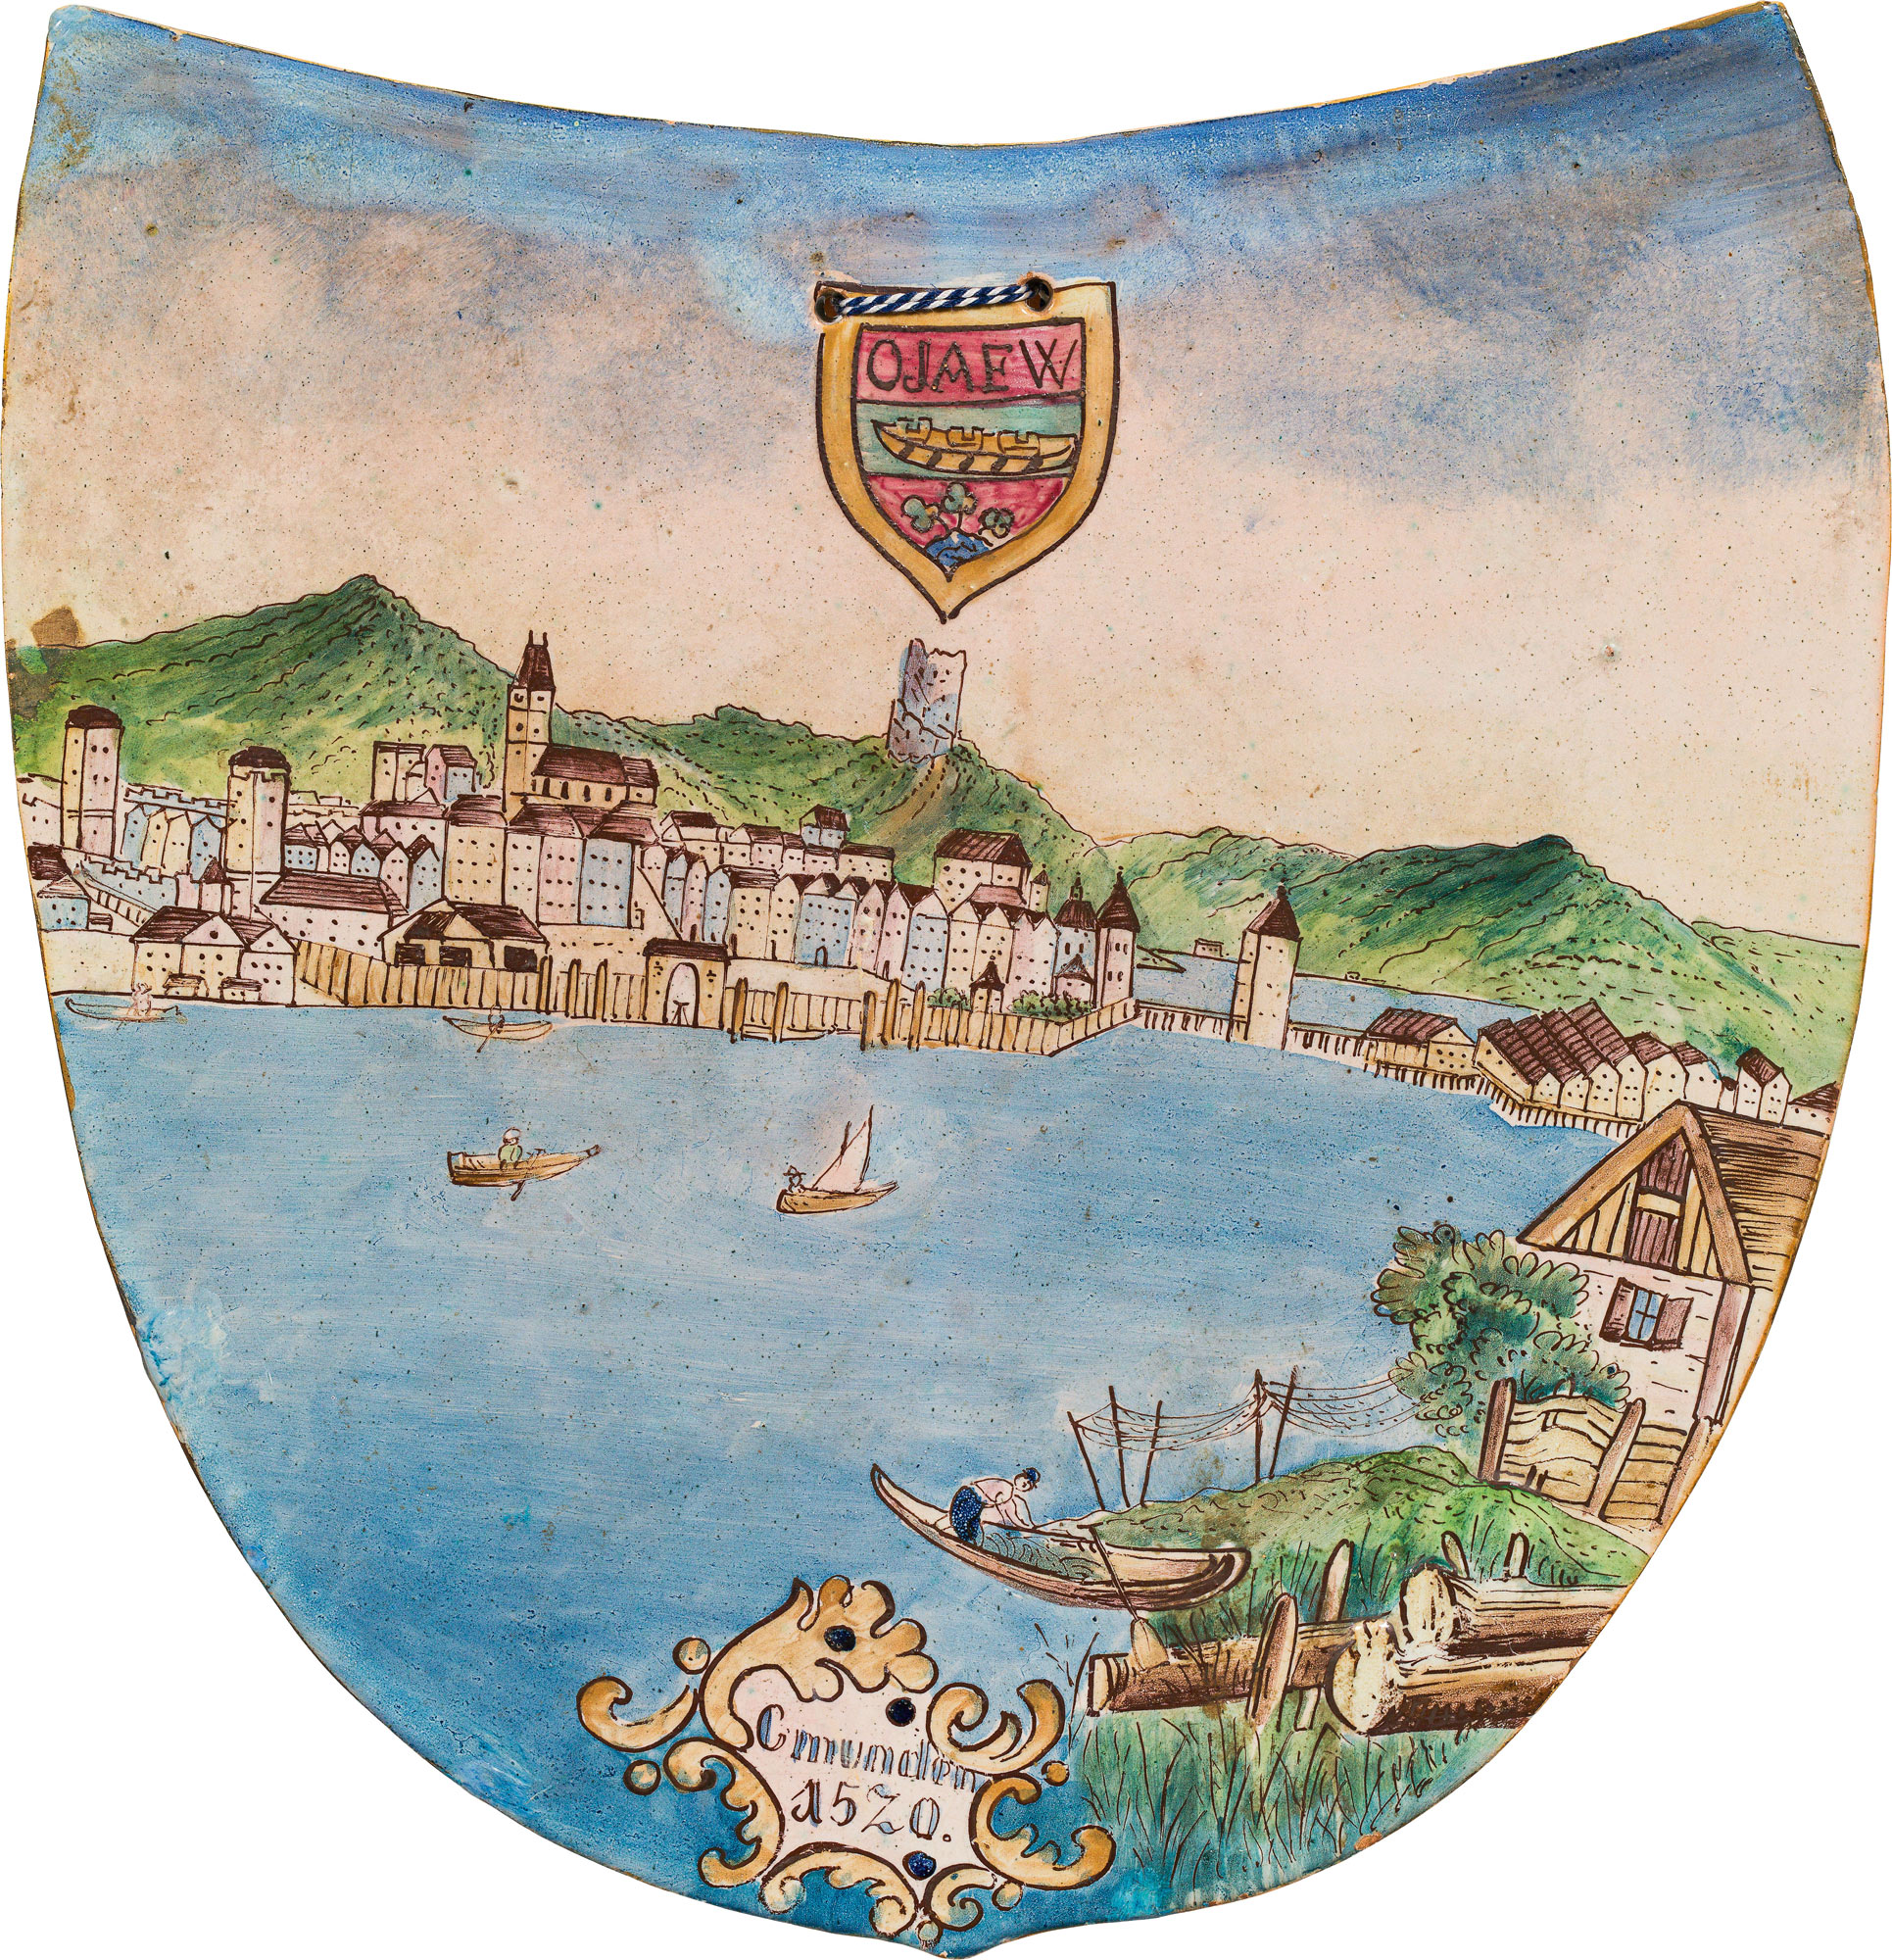 Shieldfaience, colourfully painted; cartouche with toponym "Gmunden", dated "1520", emblem of